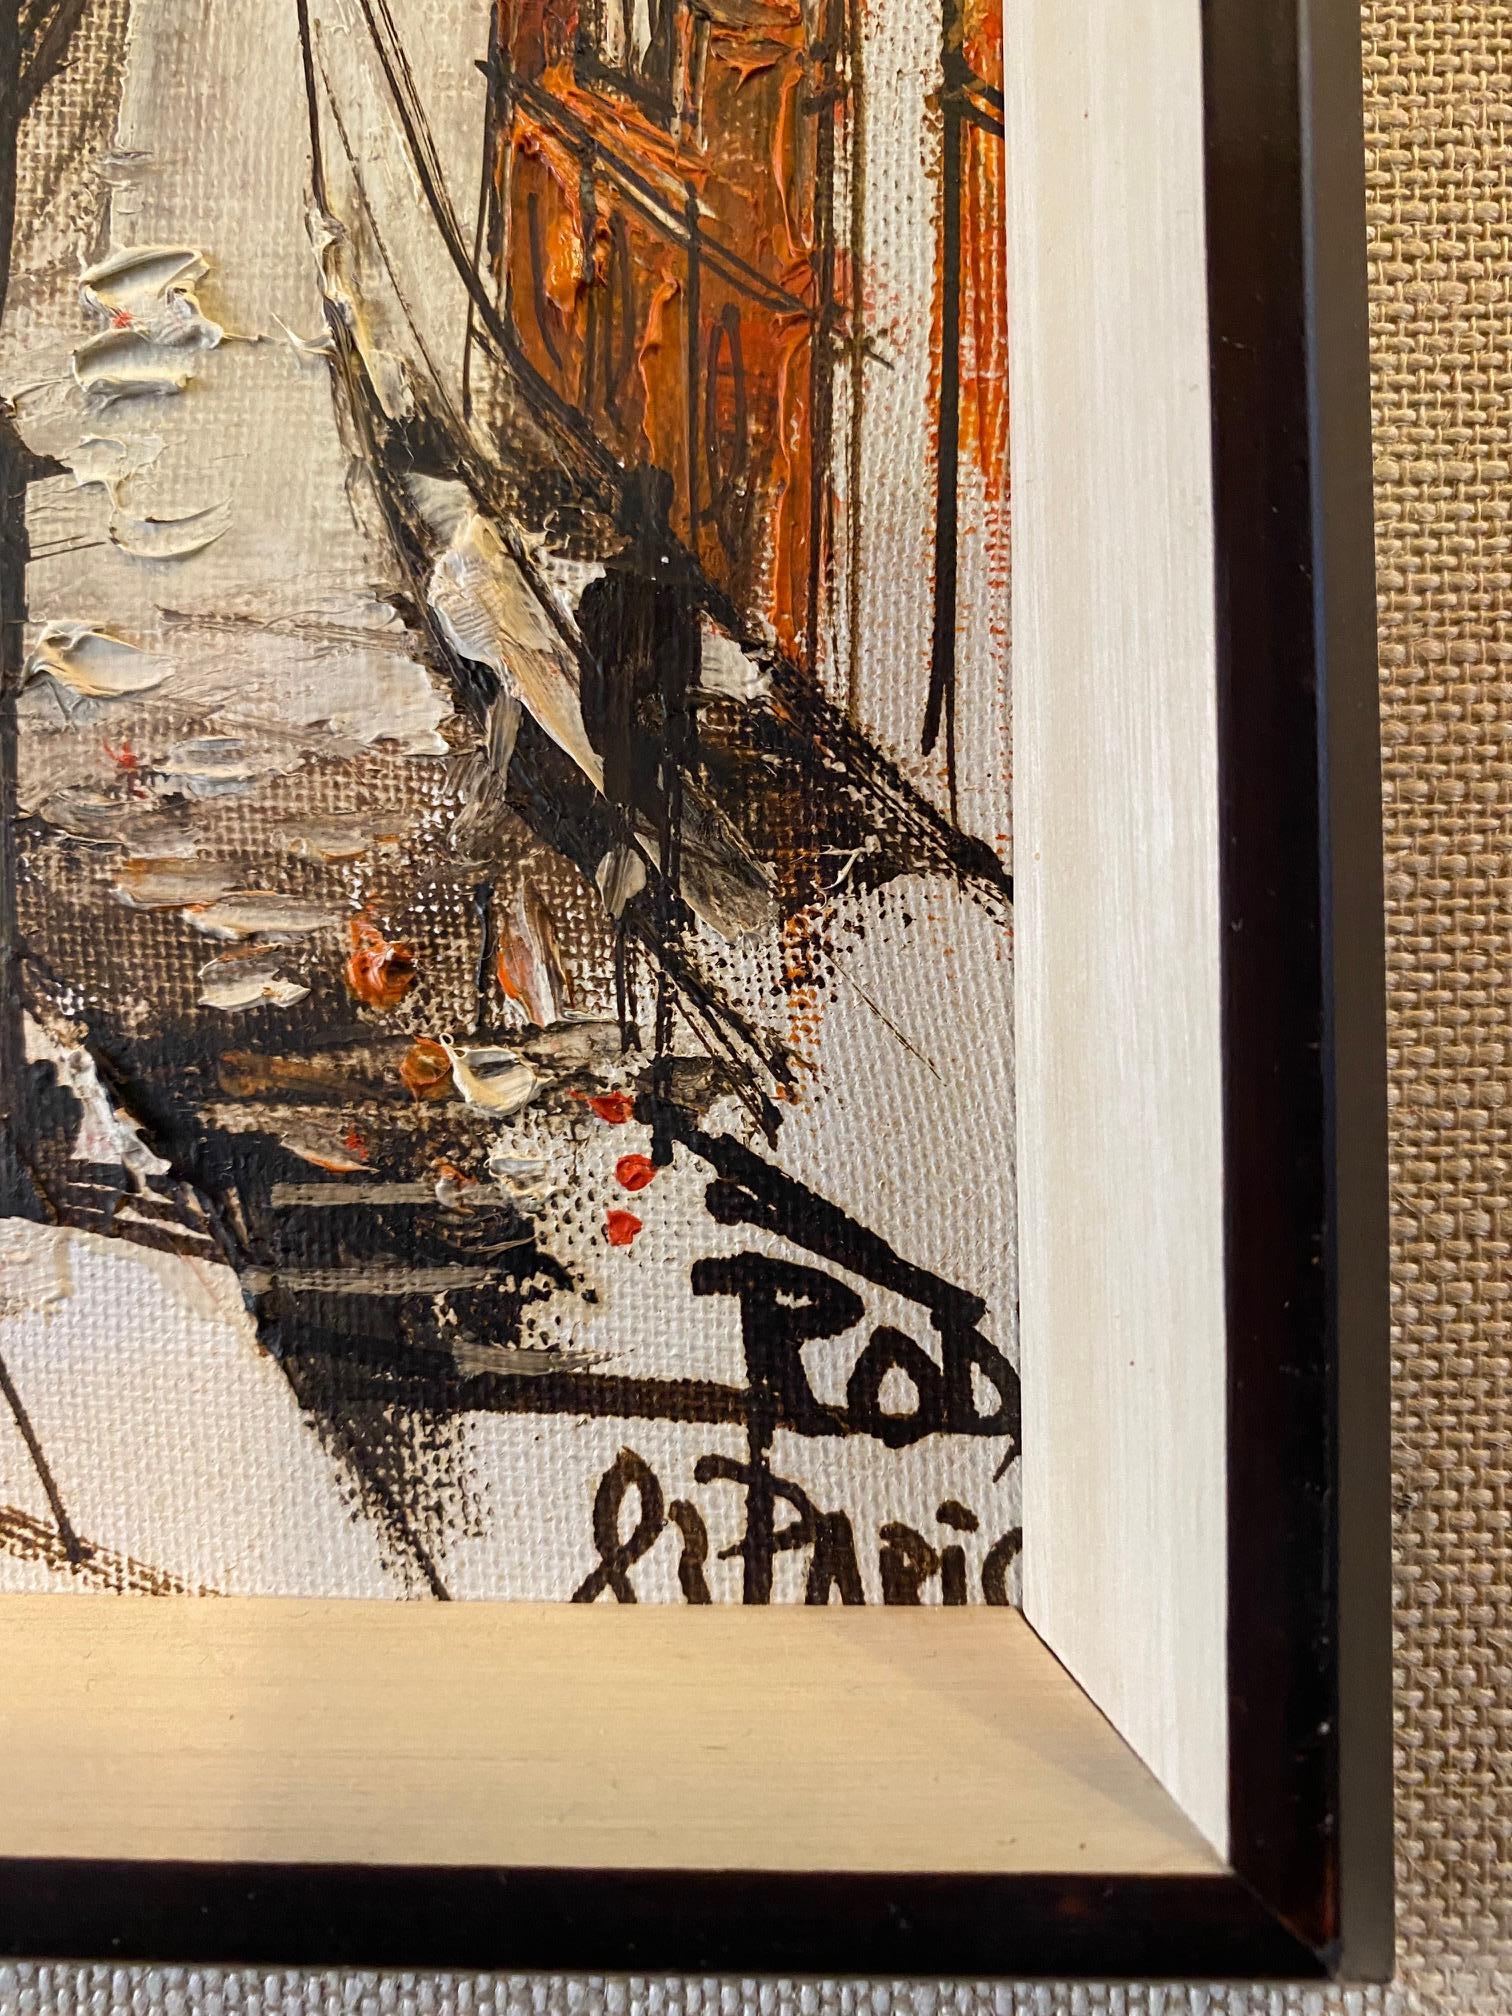 Paris 1983 by Rody - Oil on canvas 10x25 cm - Modern Painting by Unknown